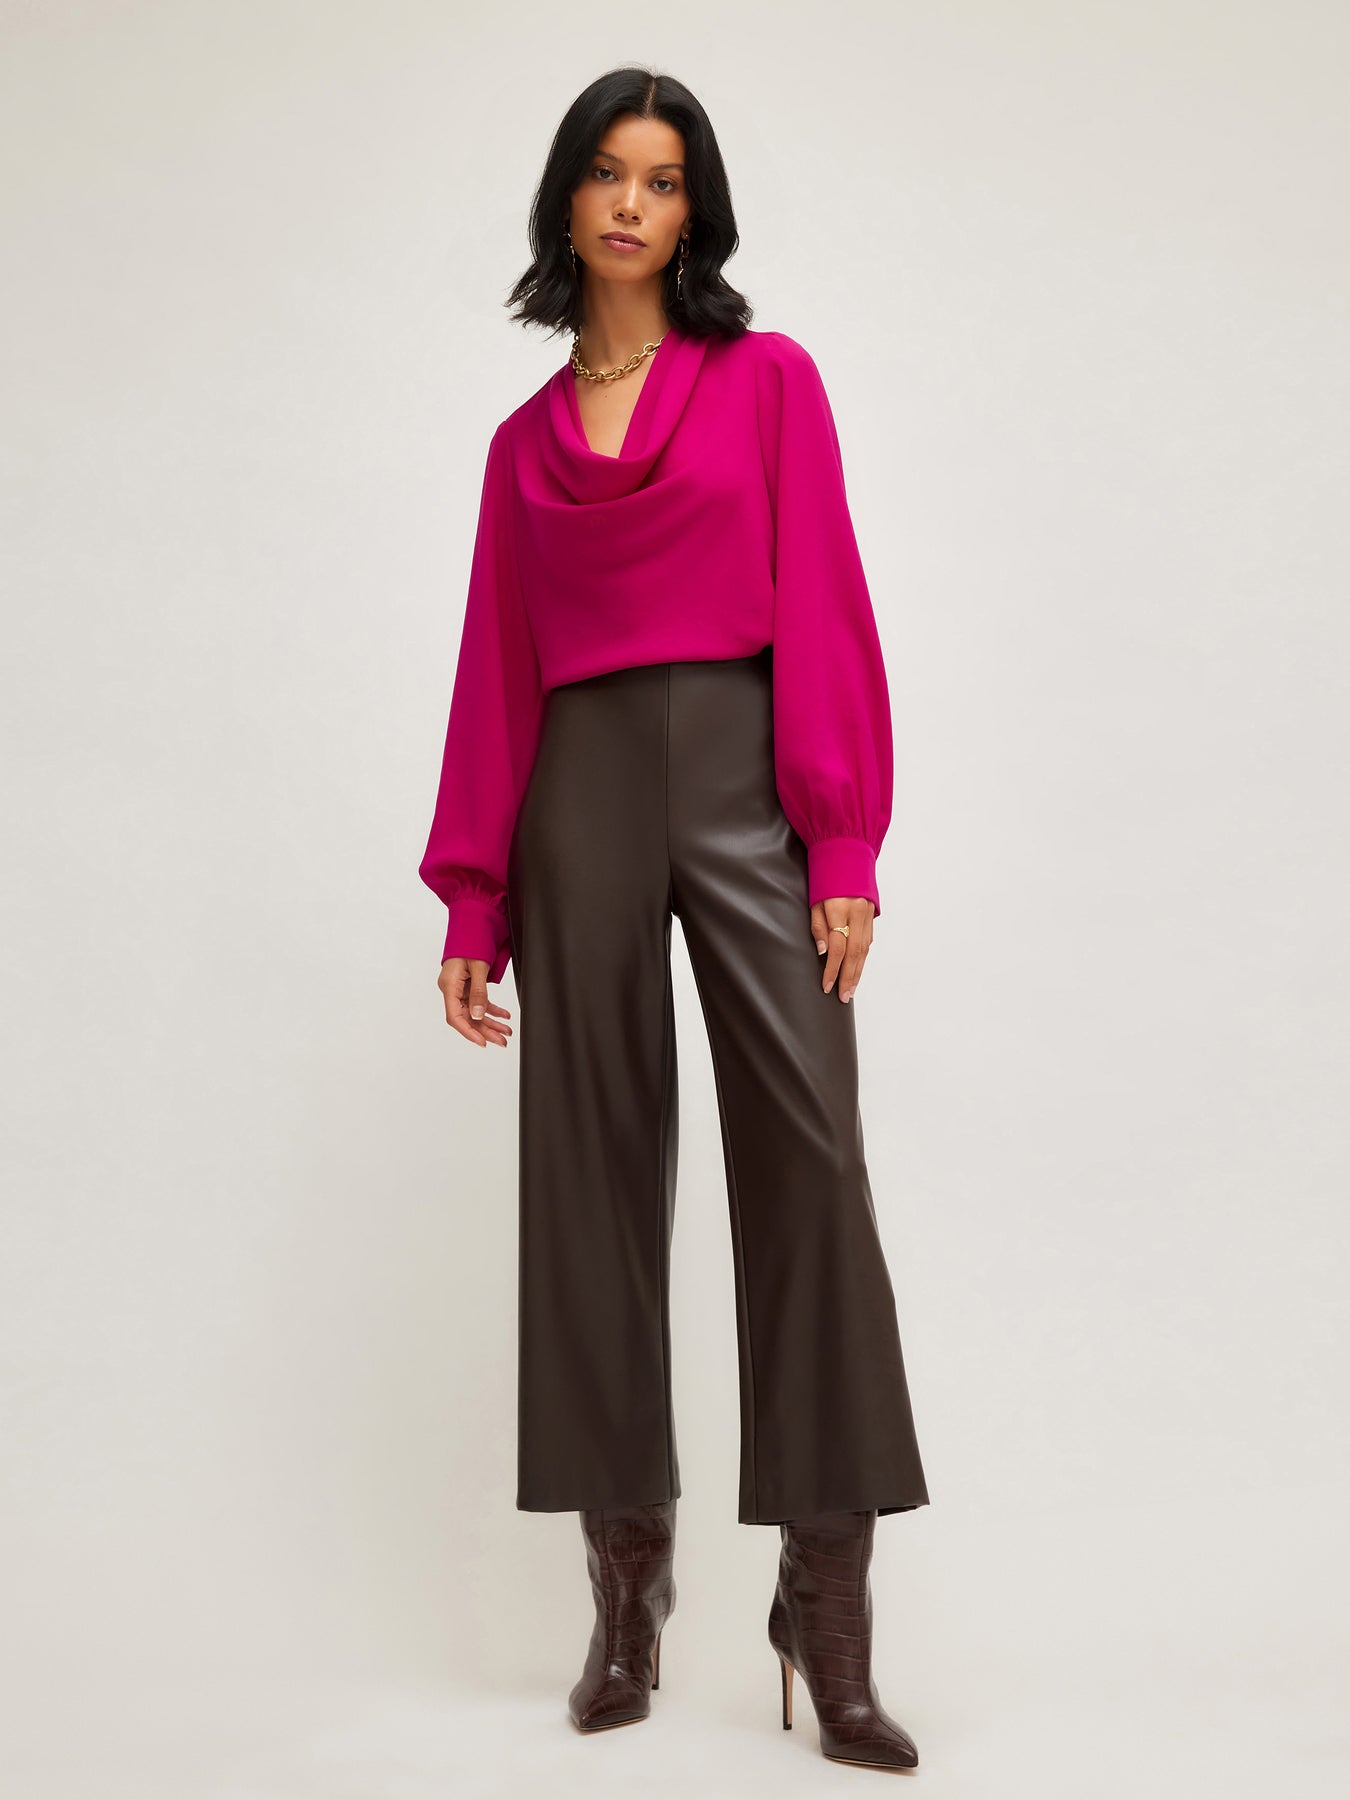 Cowl Neck Blouse in Hot Pink